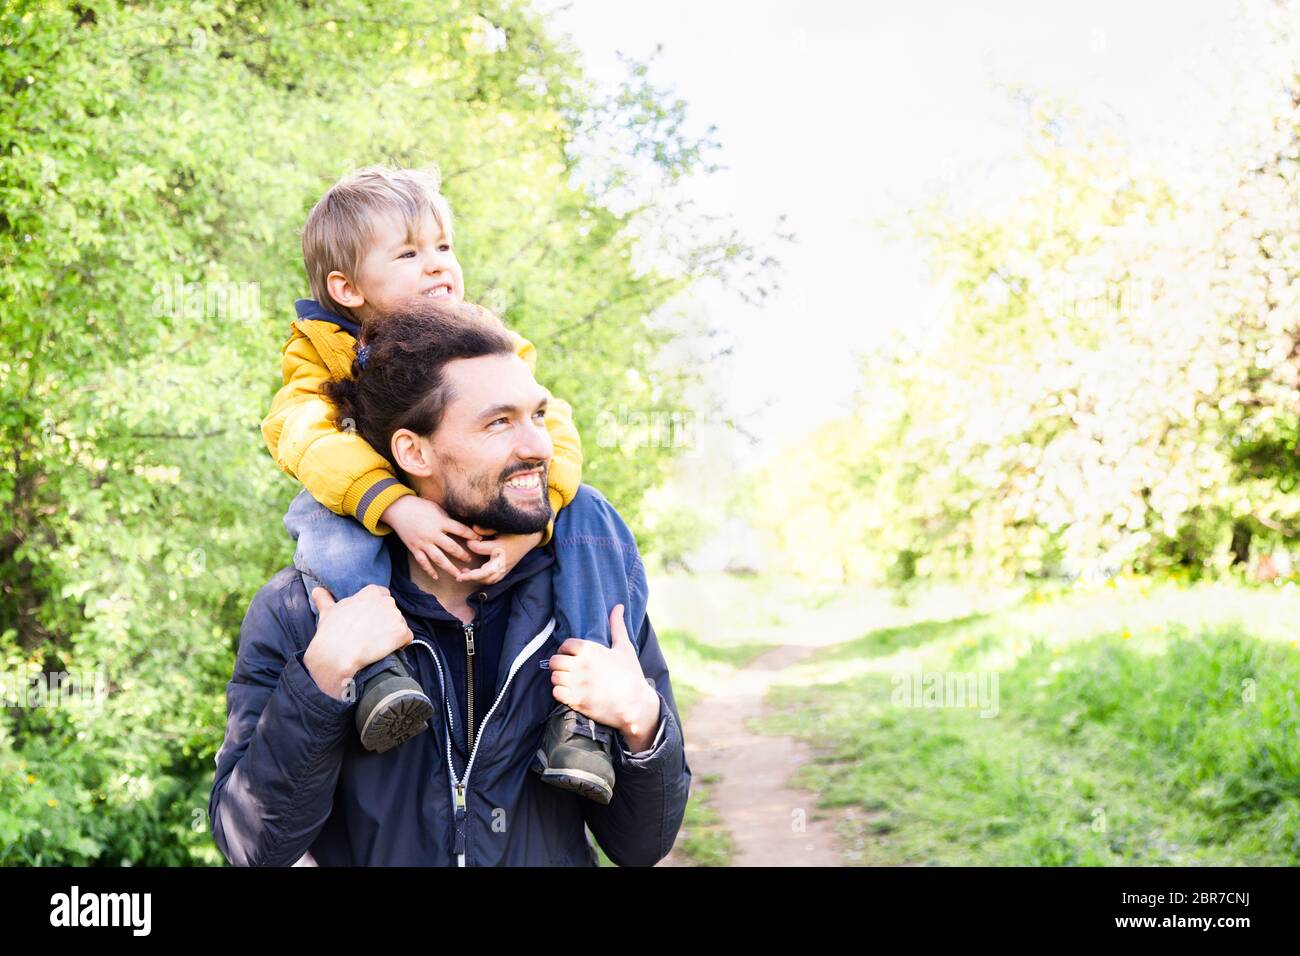 Happy family walk outdoor. Father riding his little son on his shoulders in a park. Fathers day and family fun concept Stock Photo